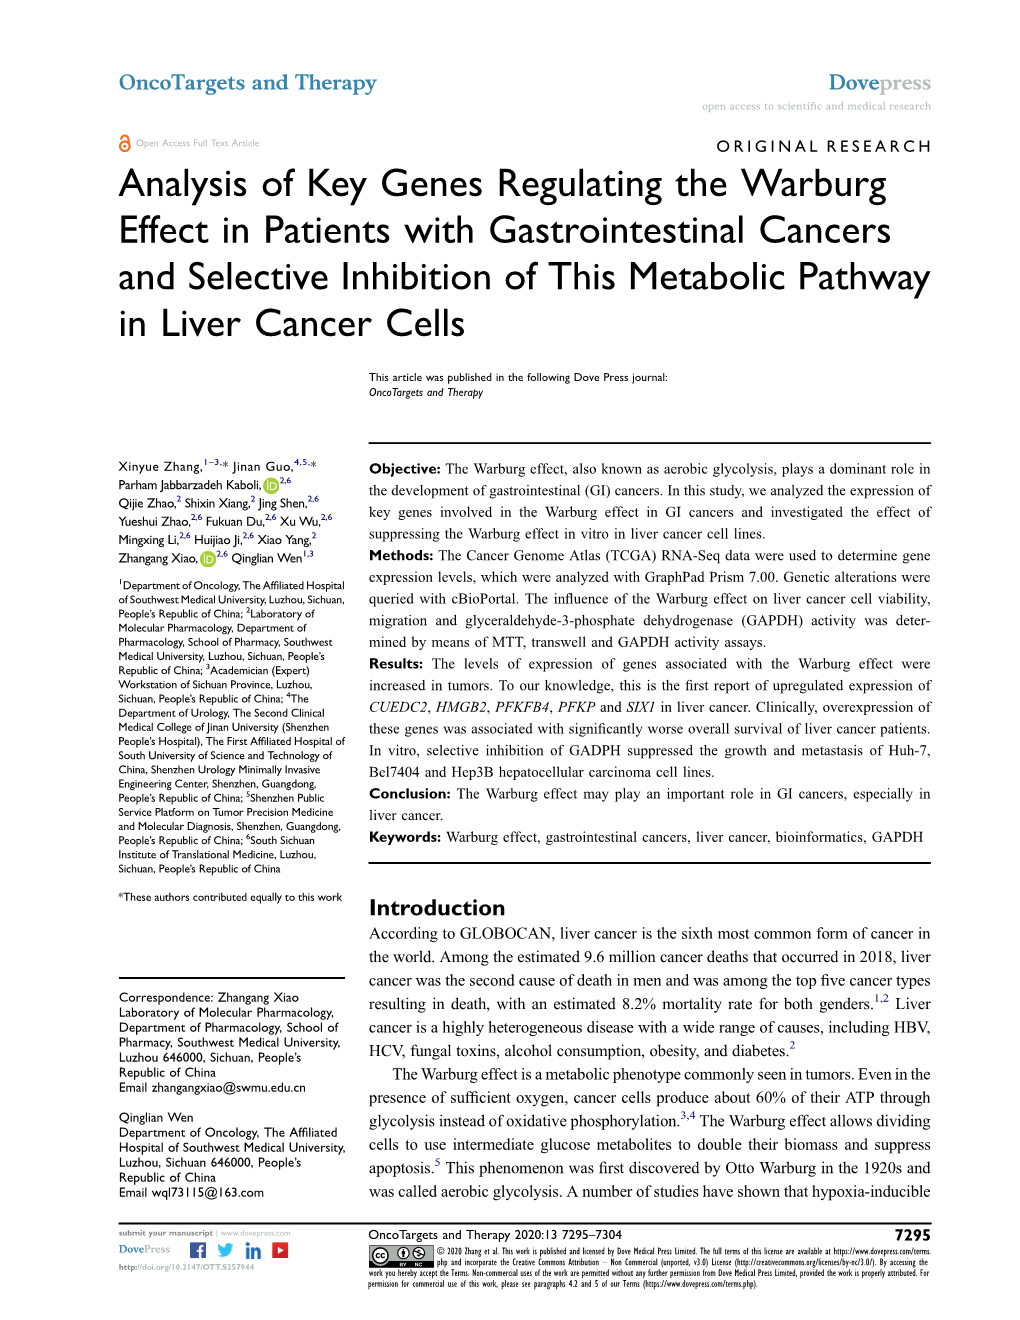 Analysis of Key Genes Regulating the Warburg Effect in Patients with Gastrointestinal Cancers and Selective Inhibition of This Metabolic Pathway in Liver Cancer Cells